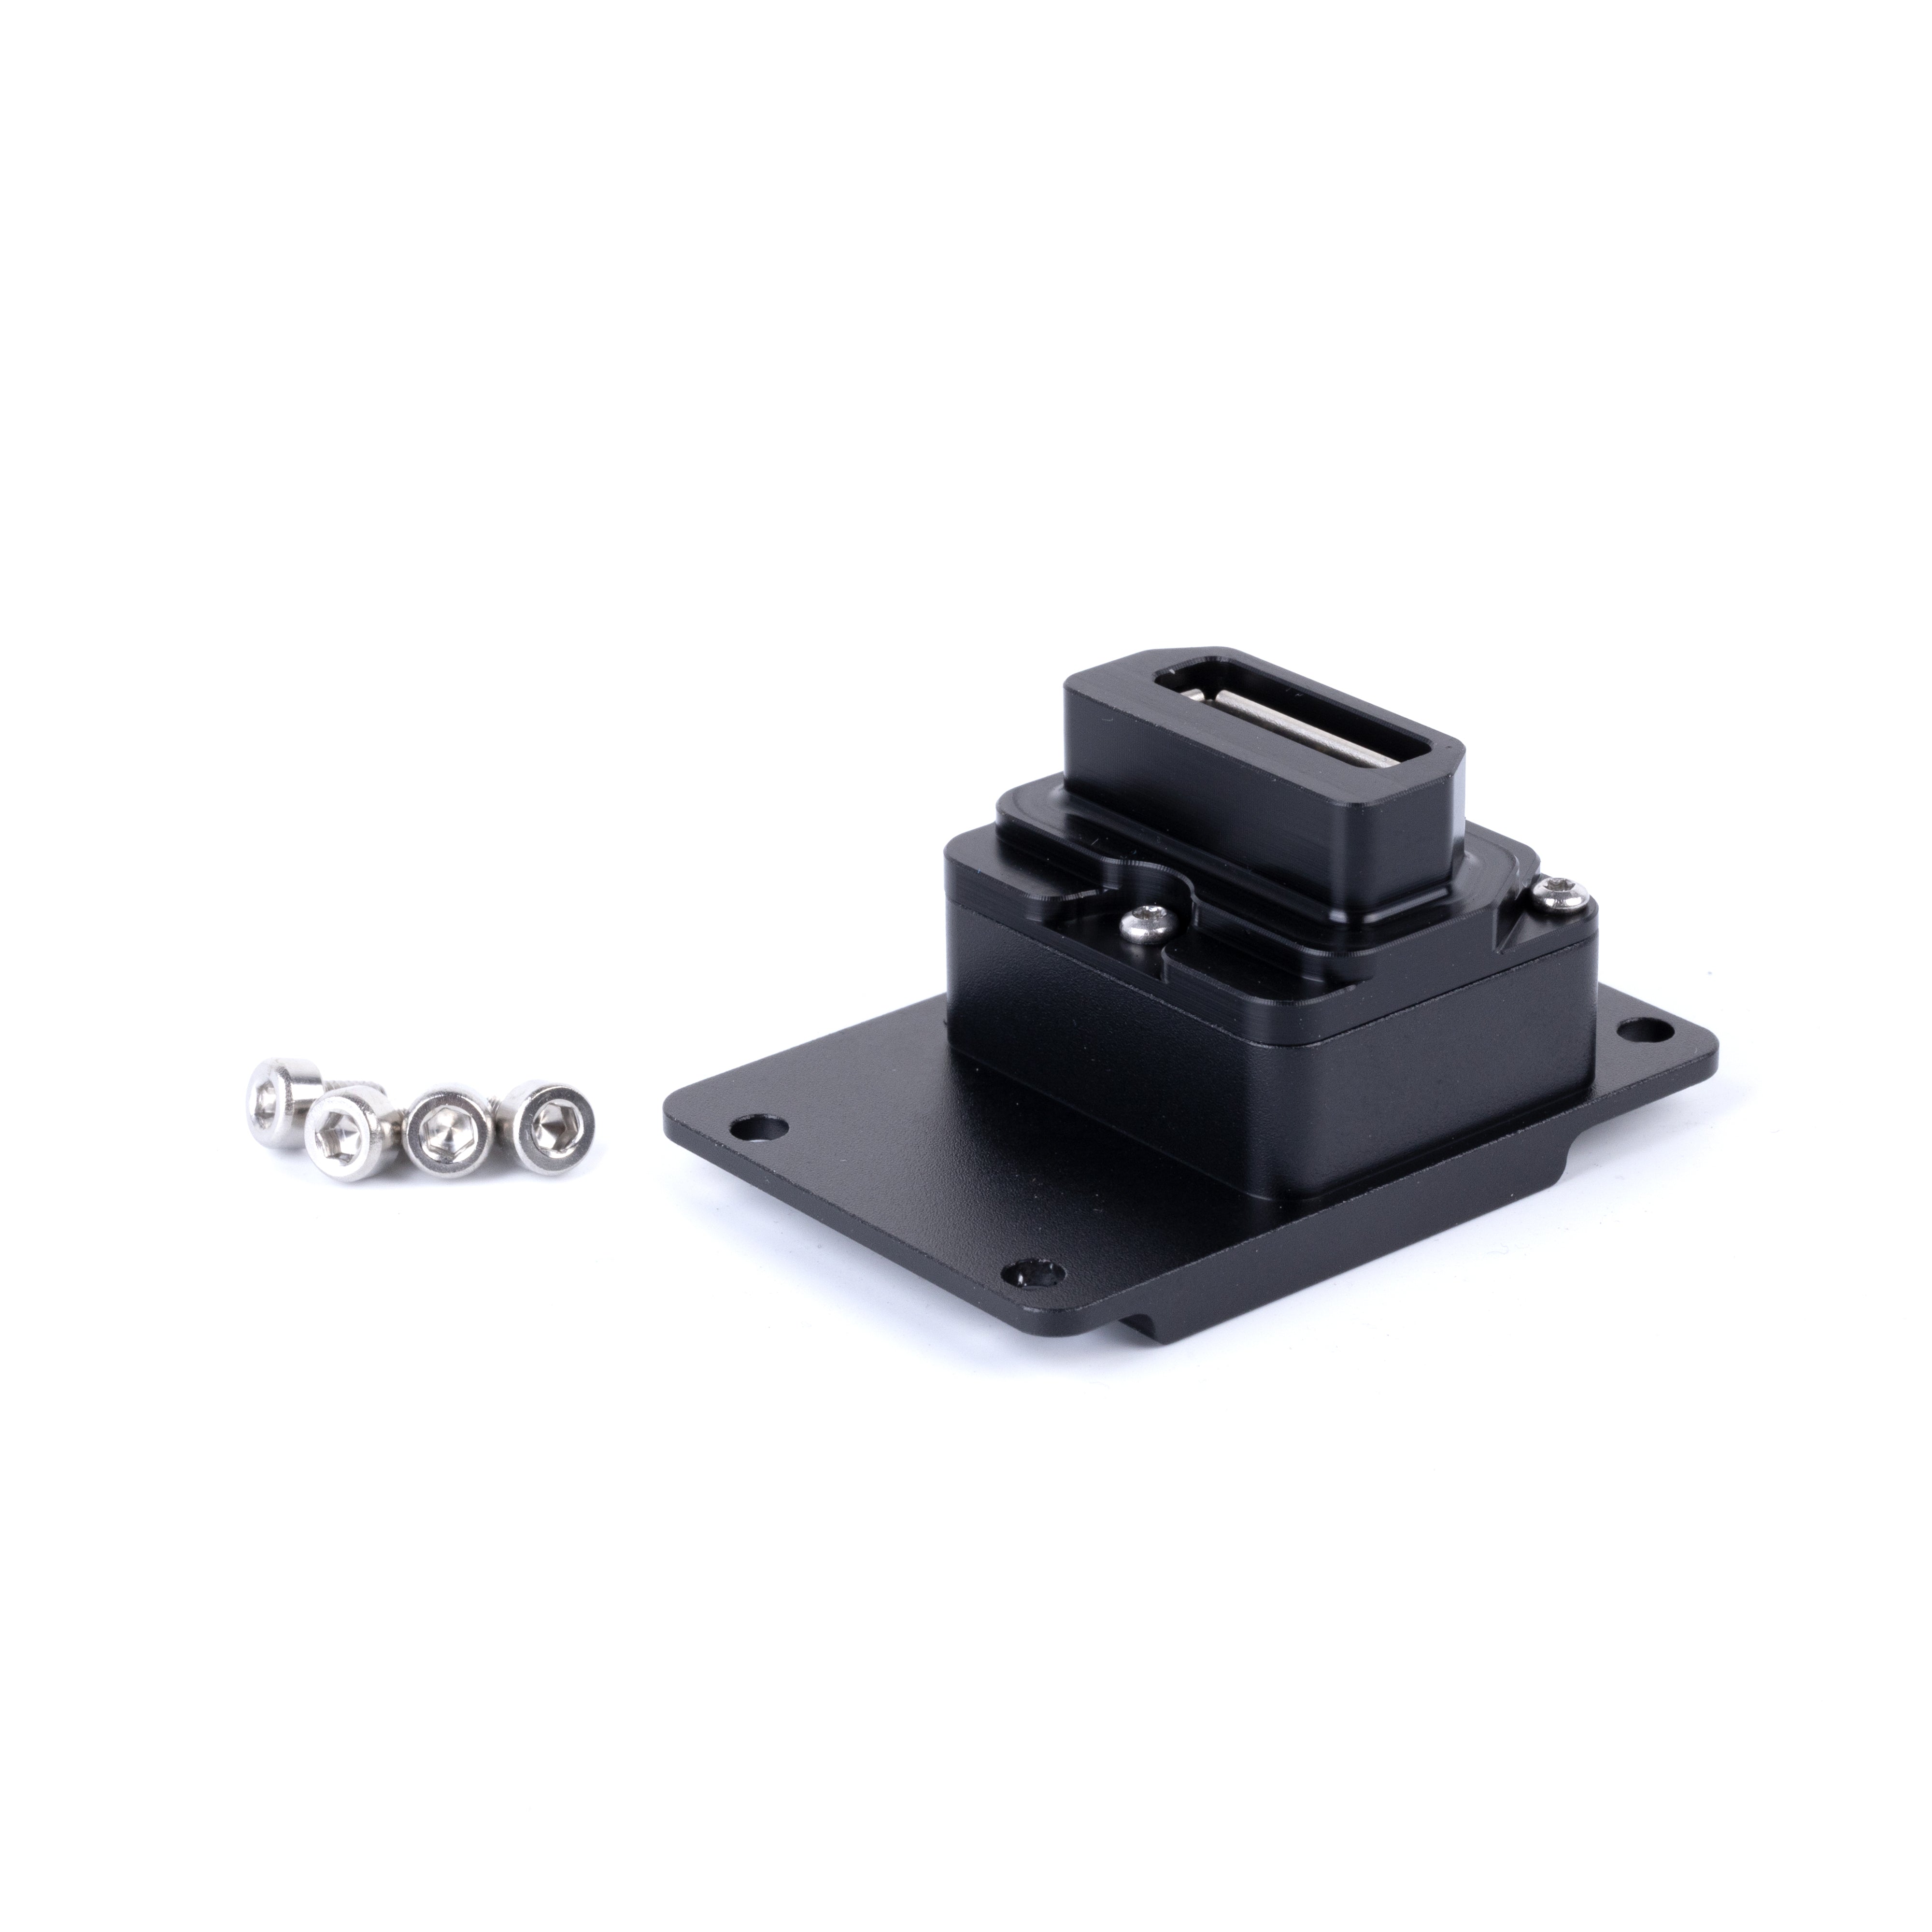 Top Plate Handle Adapter (Sony Burano to FX9)